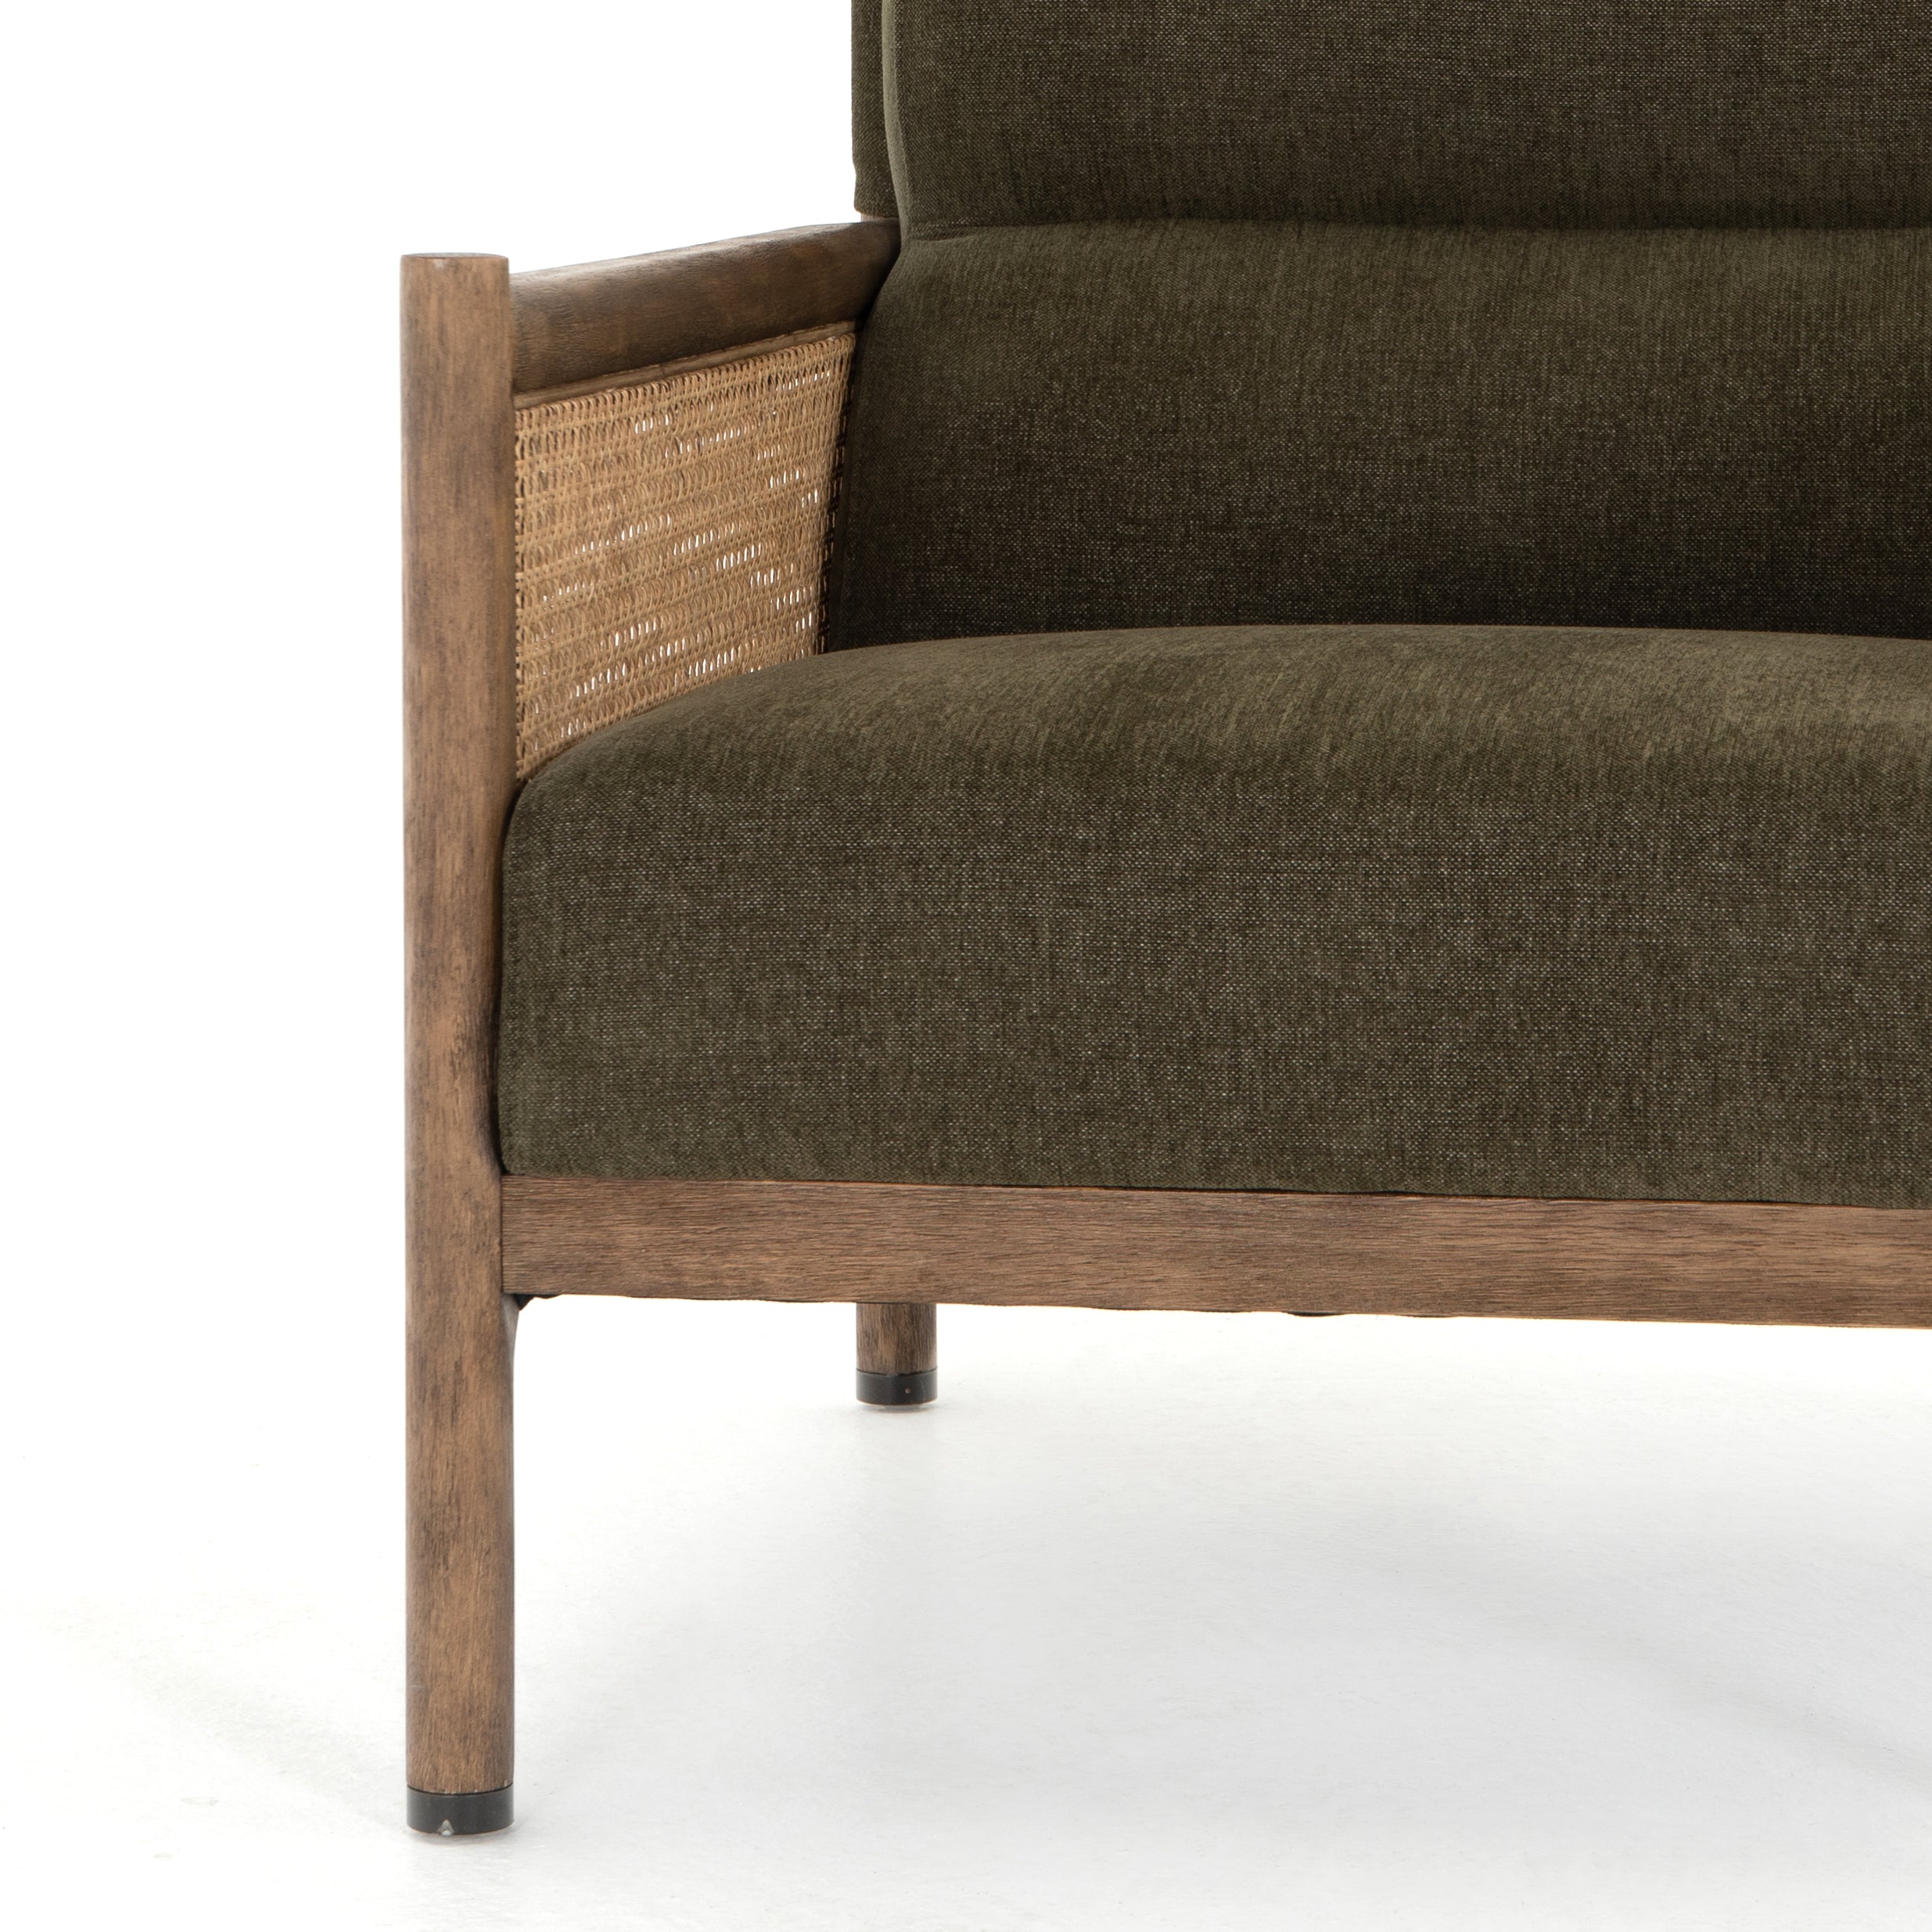 Sutton Olive Fabric &amp; Natural Cane Rattan with Distressed Natural Parawood &amp; Gunmetal Iron | Kempsey Chair | Valley Ridge Furniture